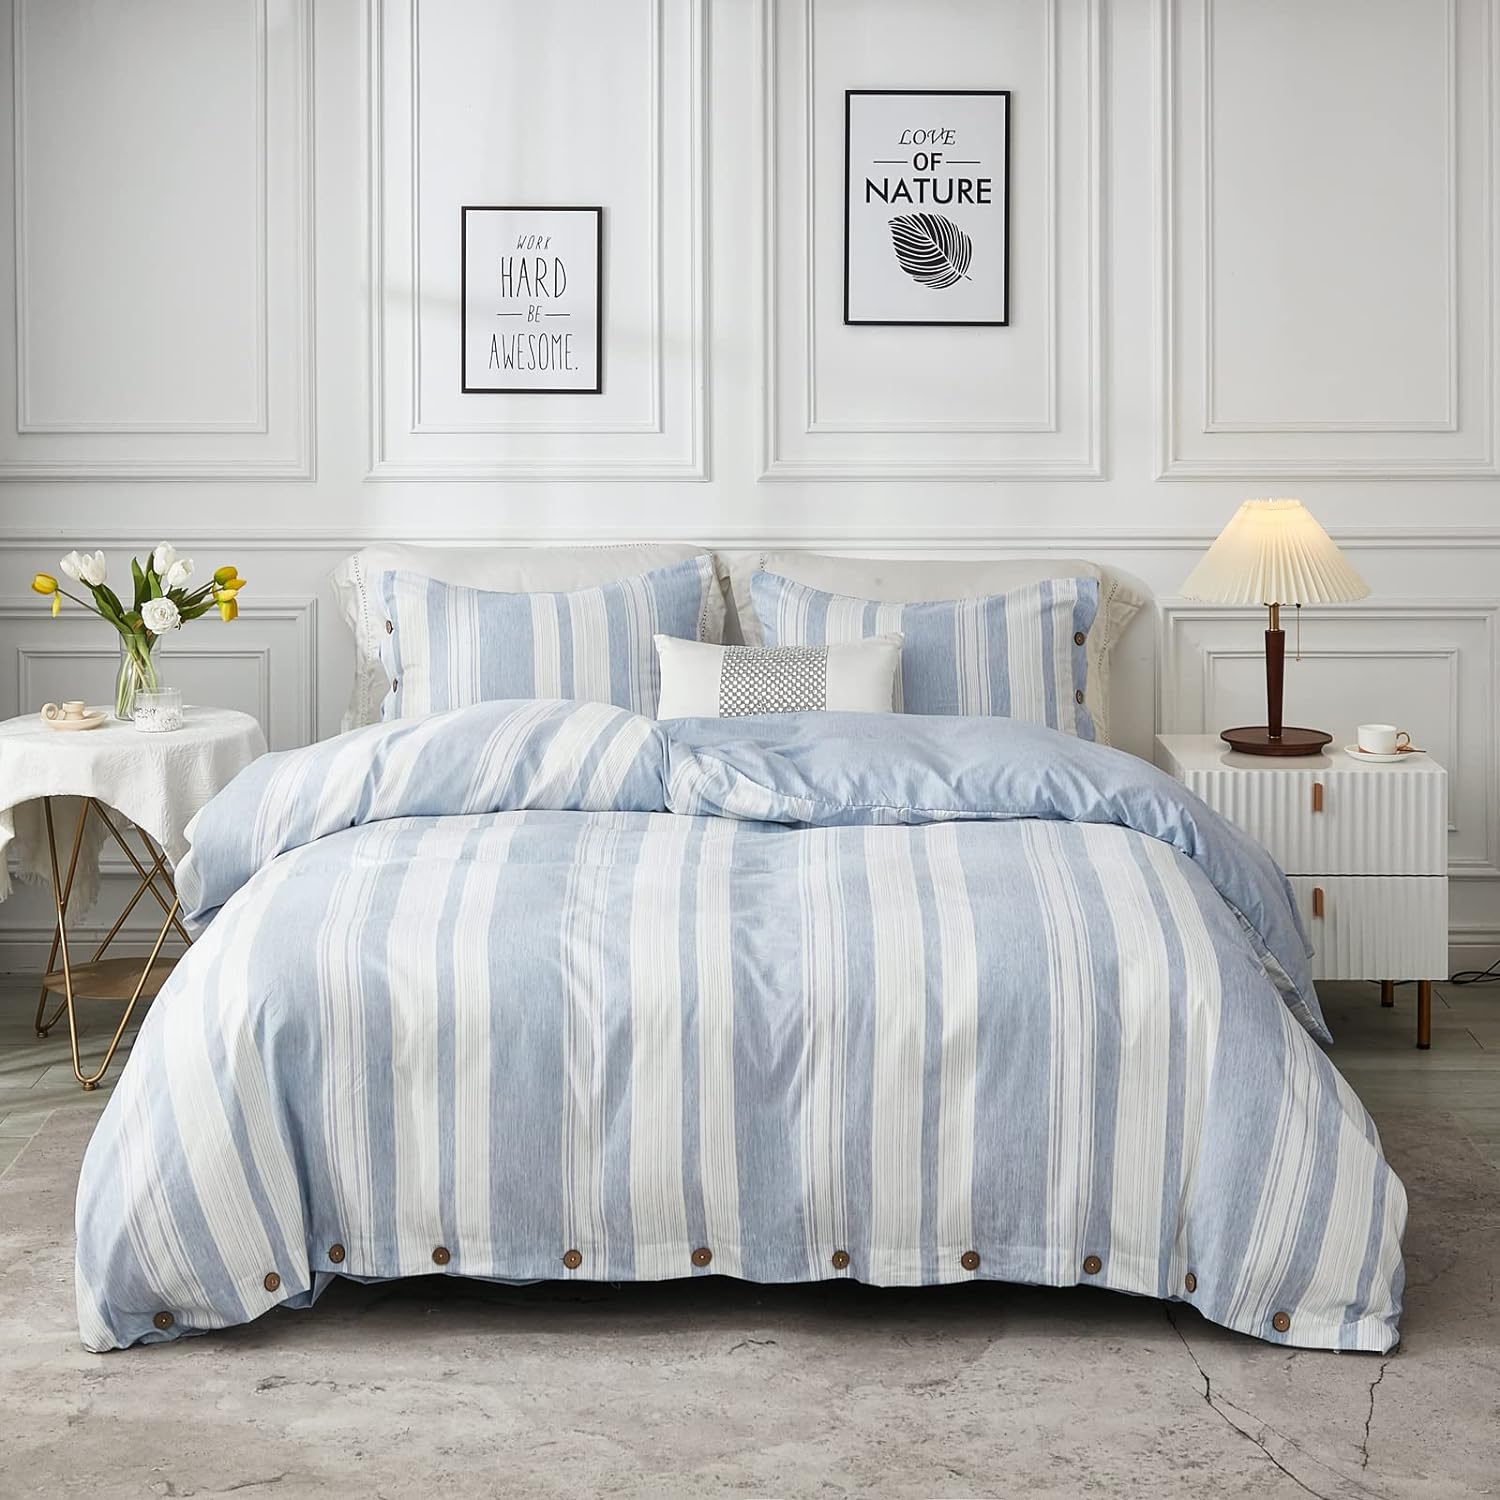 Great Choice Products Brushed Microfiber Duvet Cover Set Breathable Soft King Blue Duvet Cover 3 Pieces Striped Duvet Cover King With Buttons Closu…